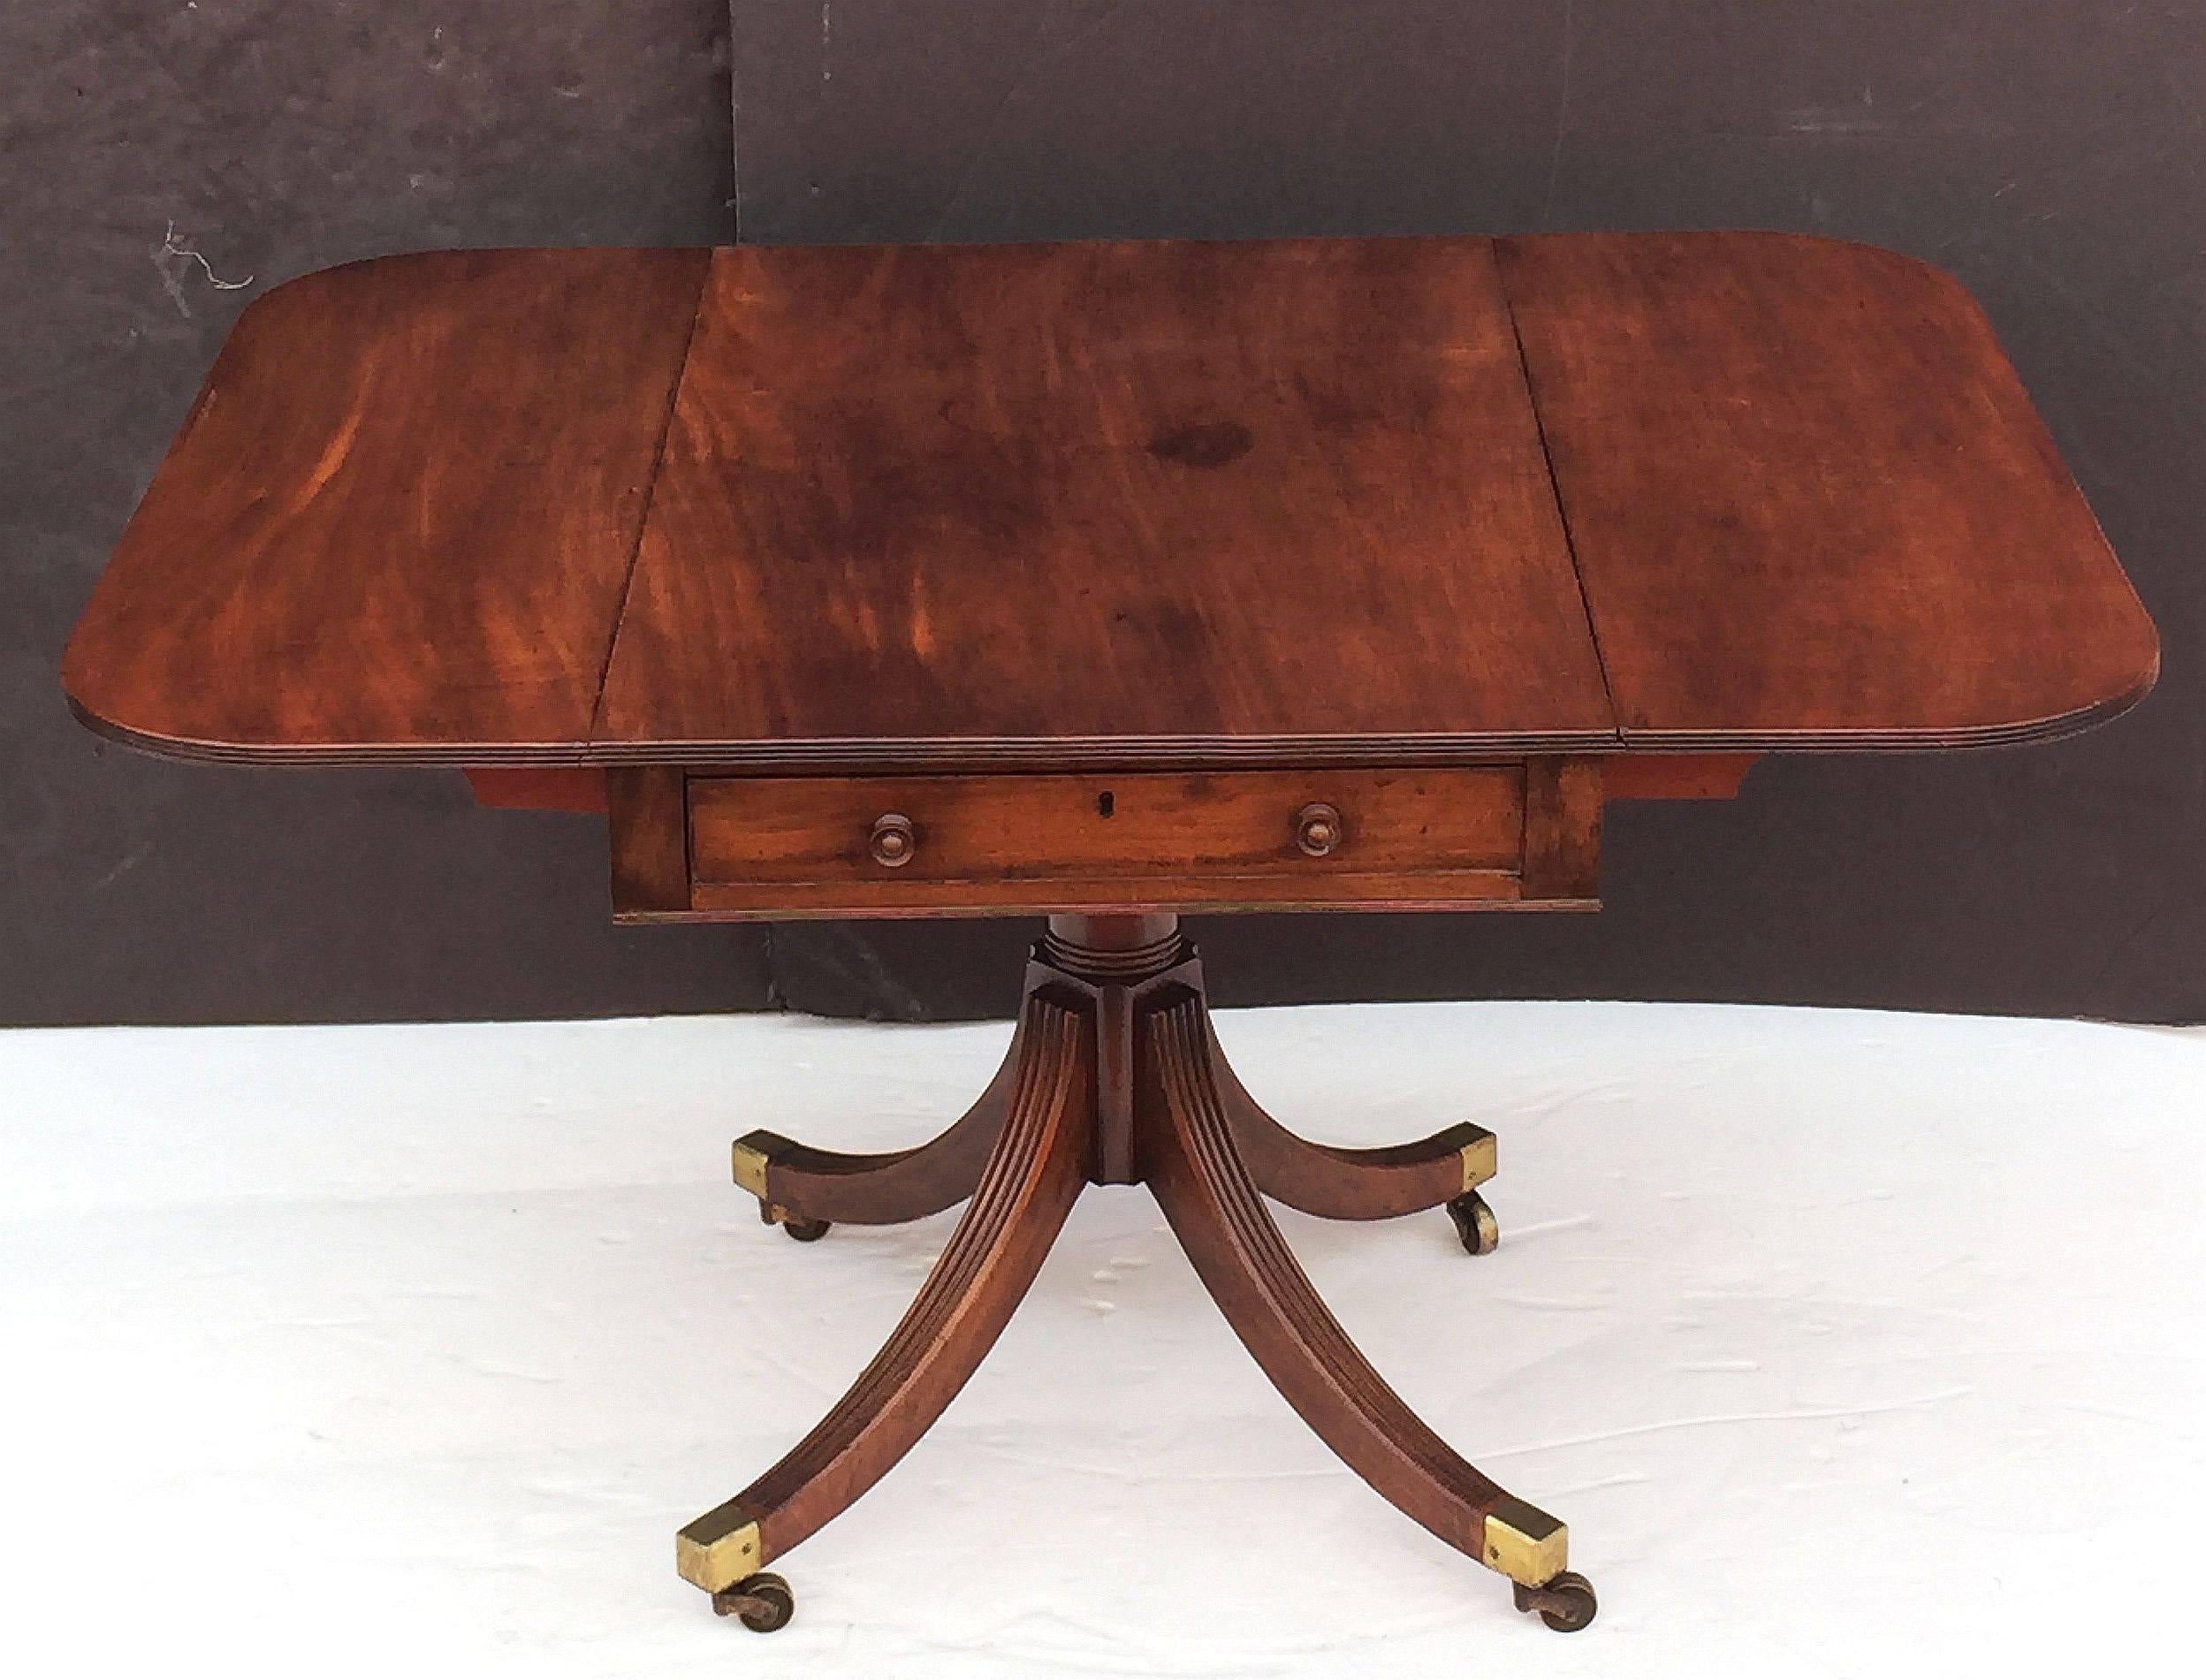 A fine English drop-leaf Pembroke table of Cuban mahogany, featuring a handsome rectangular top with fold-down sides, over a frieze with drawer and opposing faux drawer, set upon a baluster stem and four splay legs (on brass casters) - a